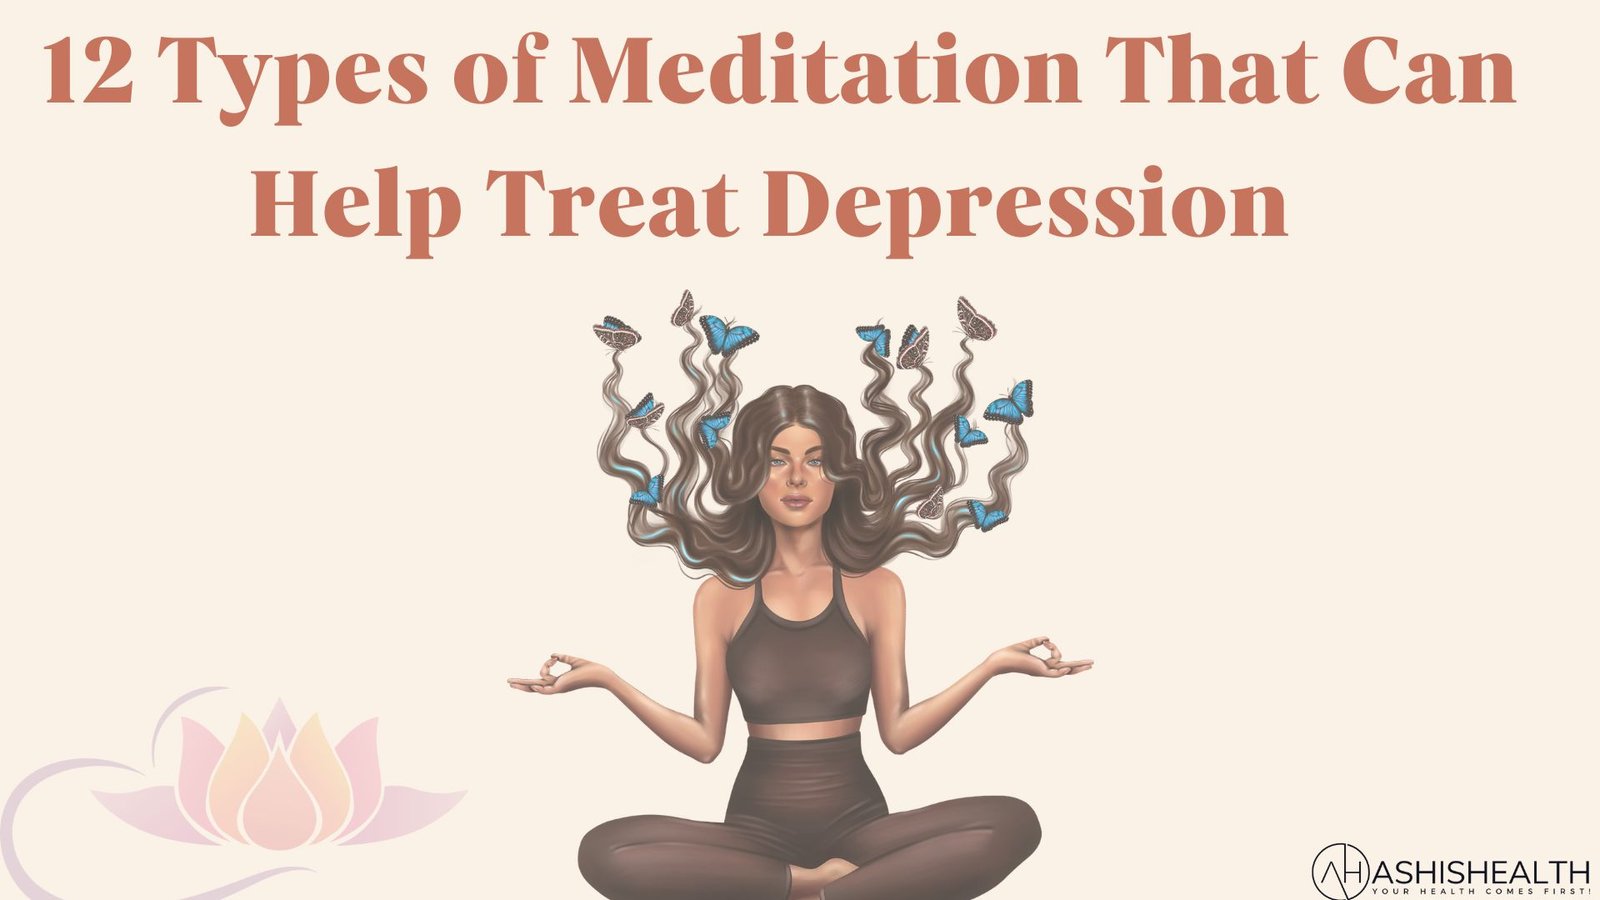 12 Types of Meditation That Can Help Treat Depression